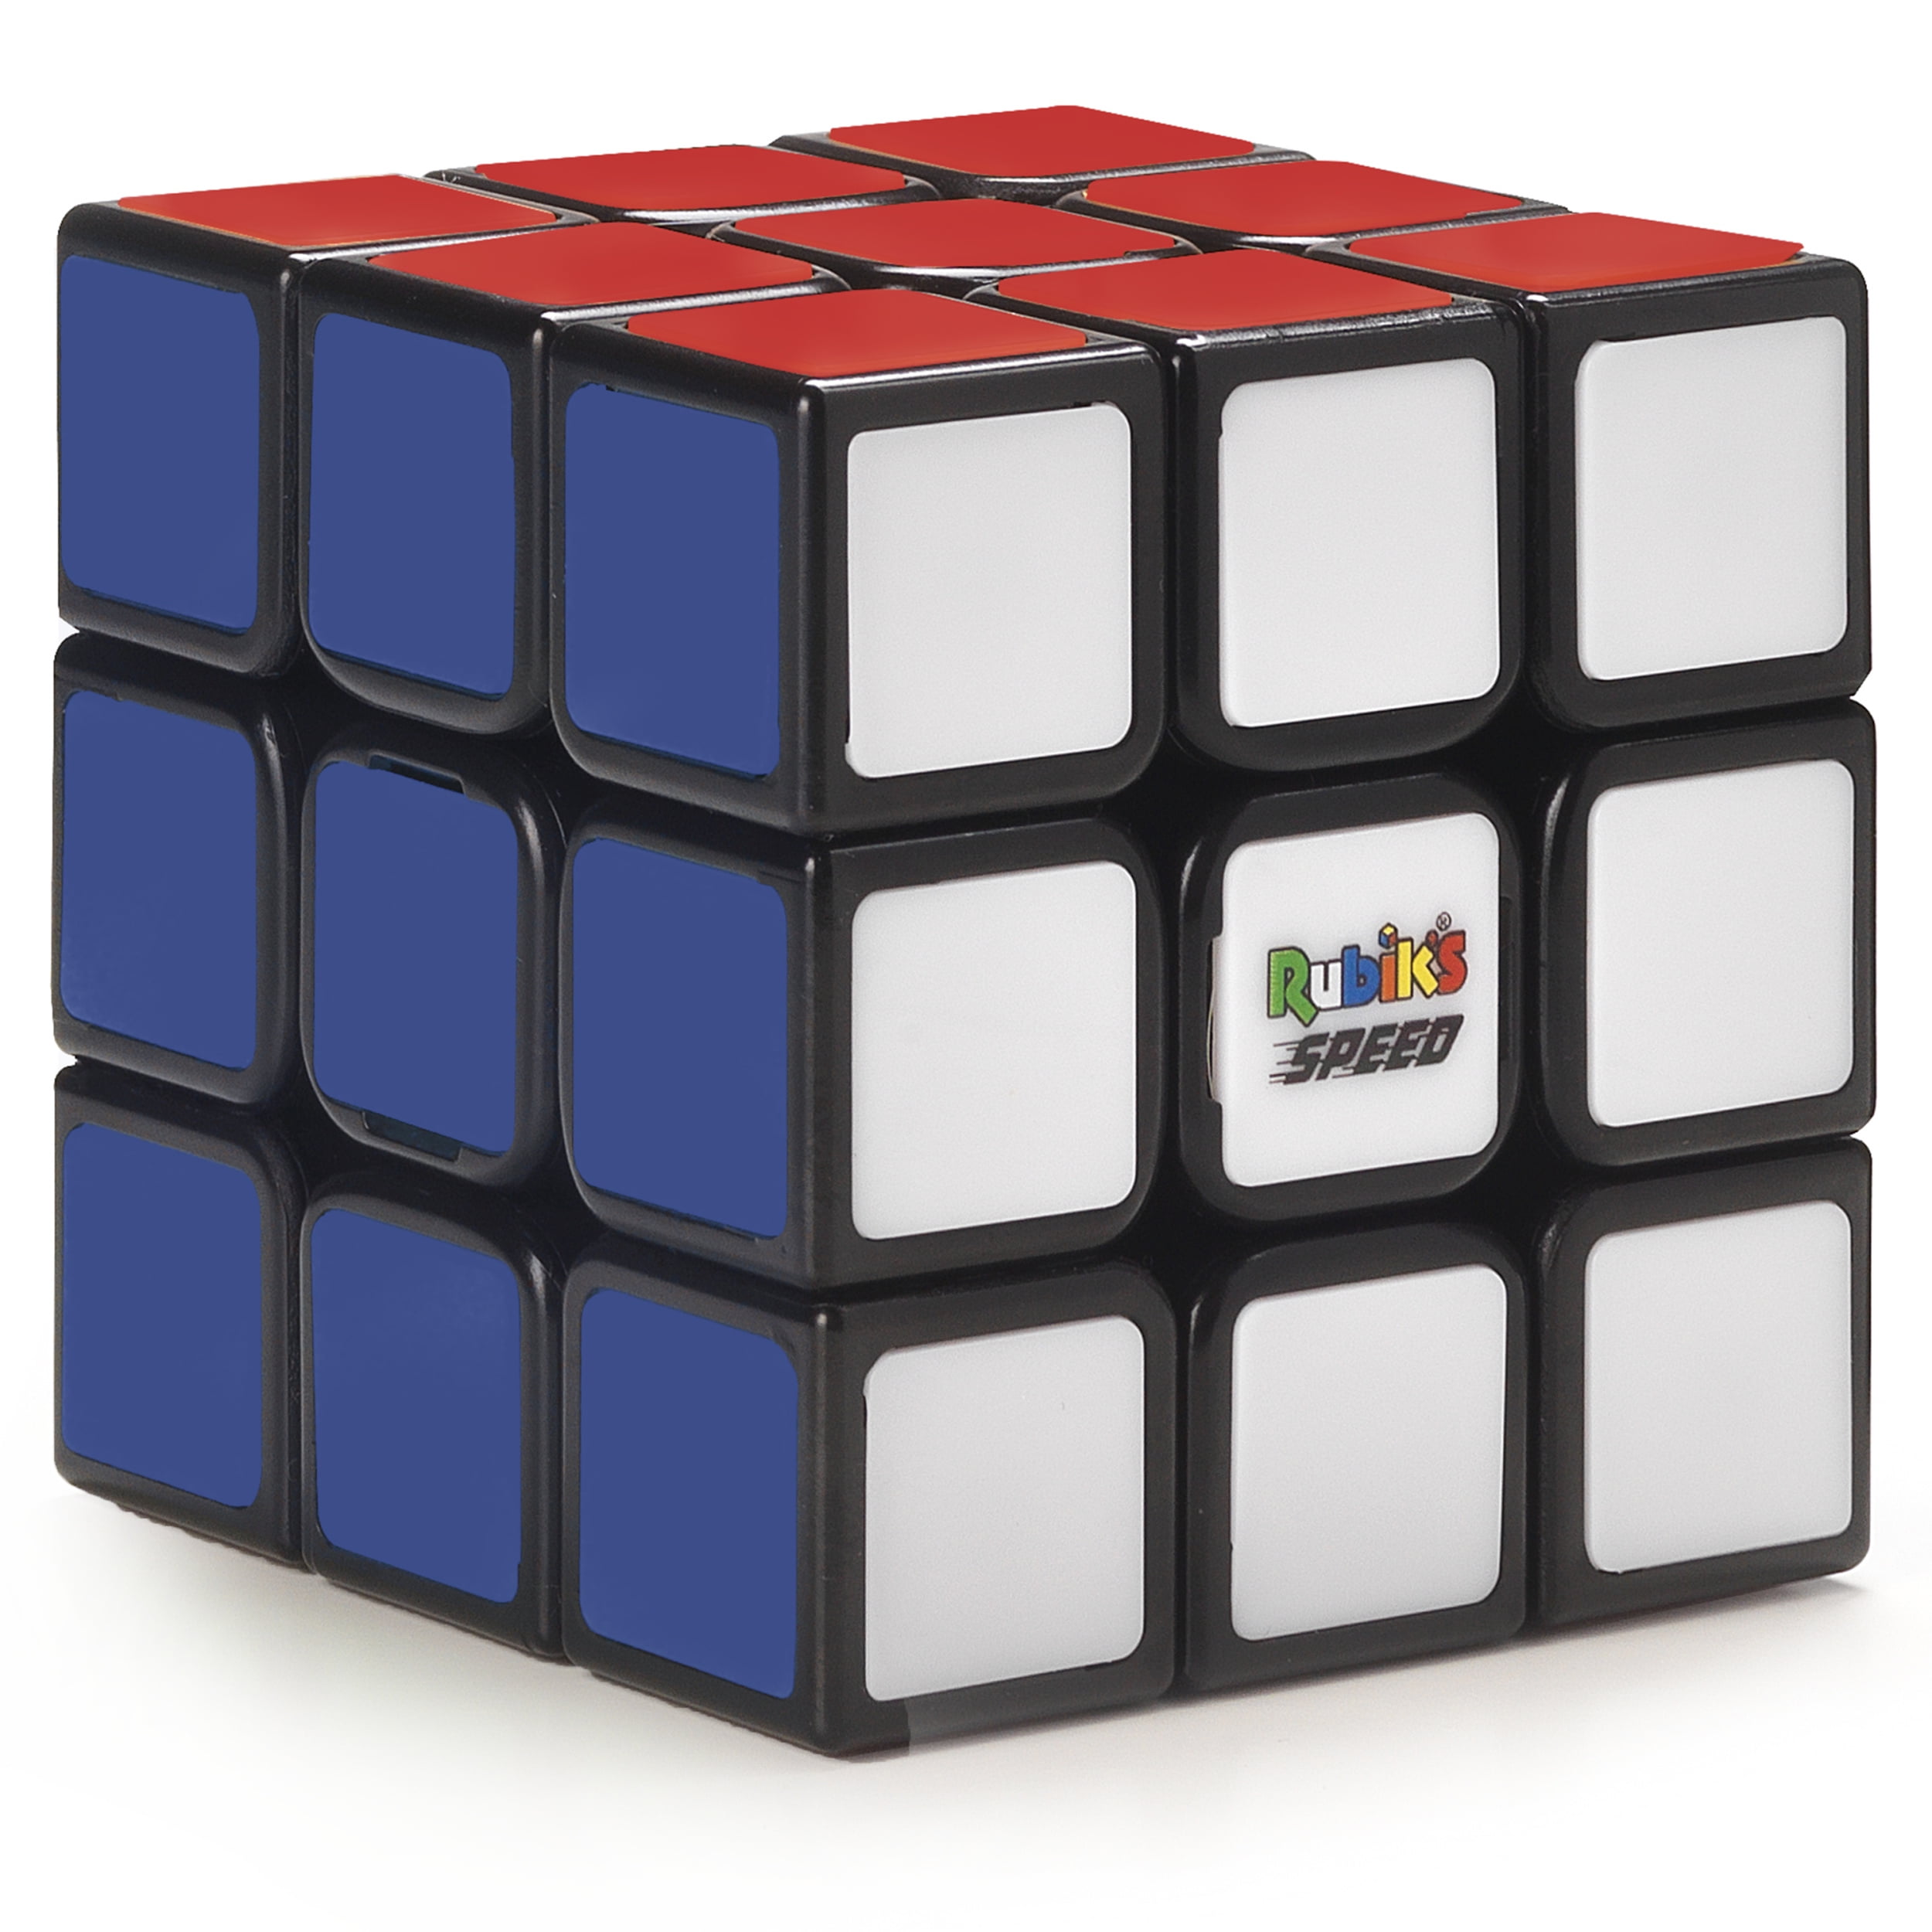 3x3x3 ABS Magic Speed Cube Rubix Brain Puzzle Game Kids Adults Hand Toy Gifts 